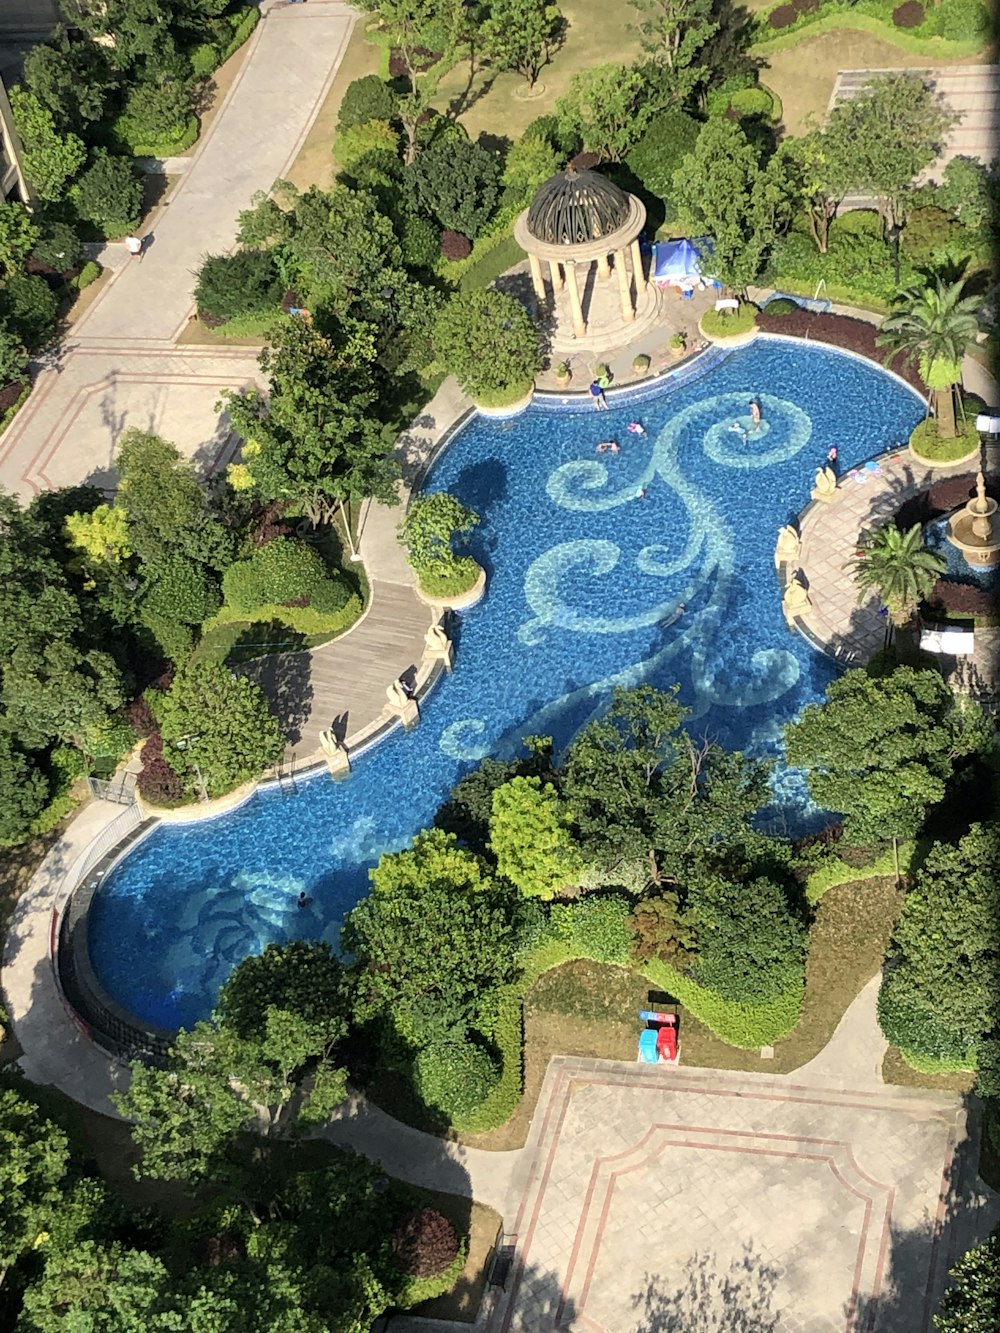 large blue and white pool surrounded by green trees at daytime